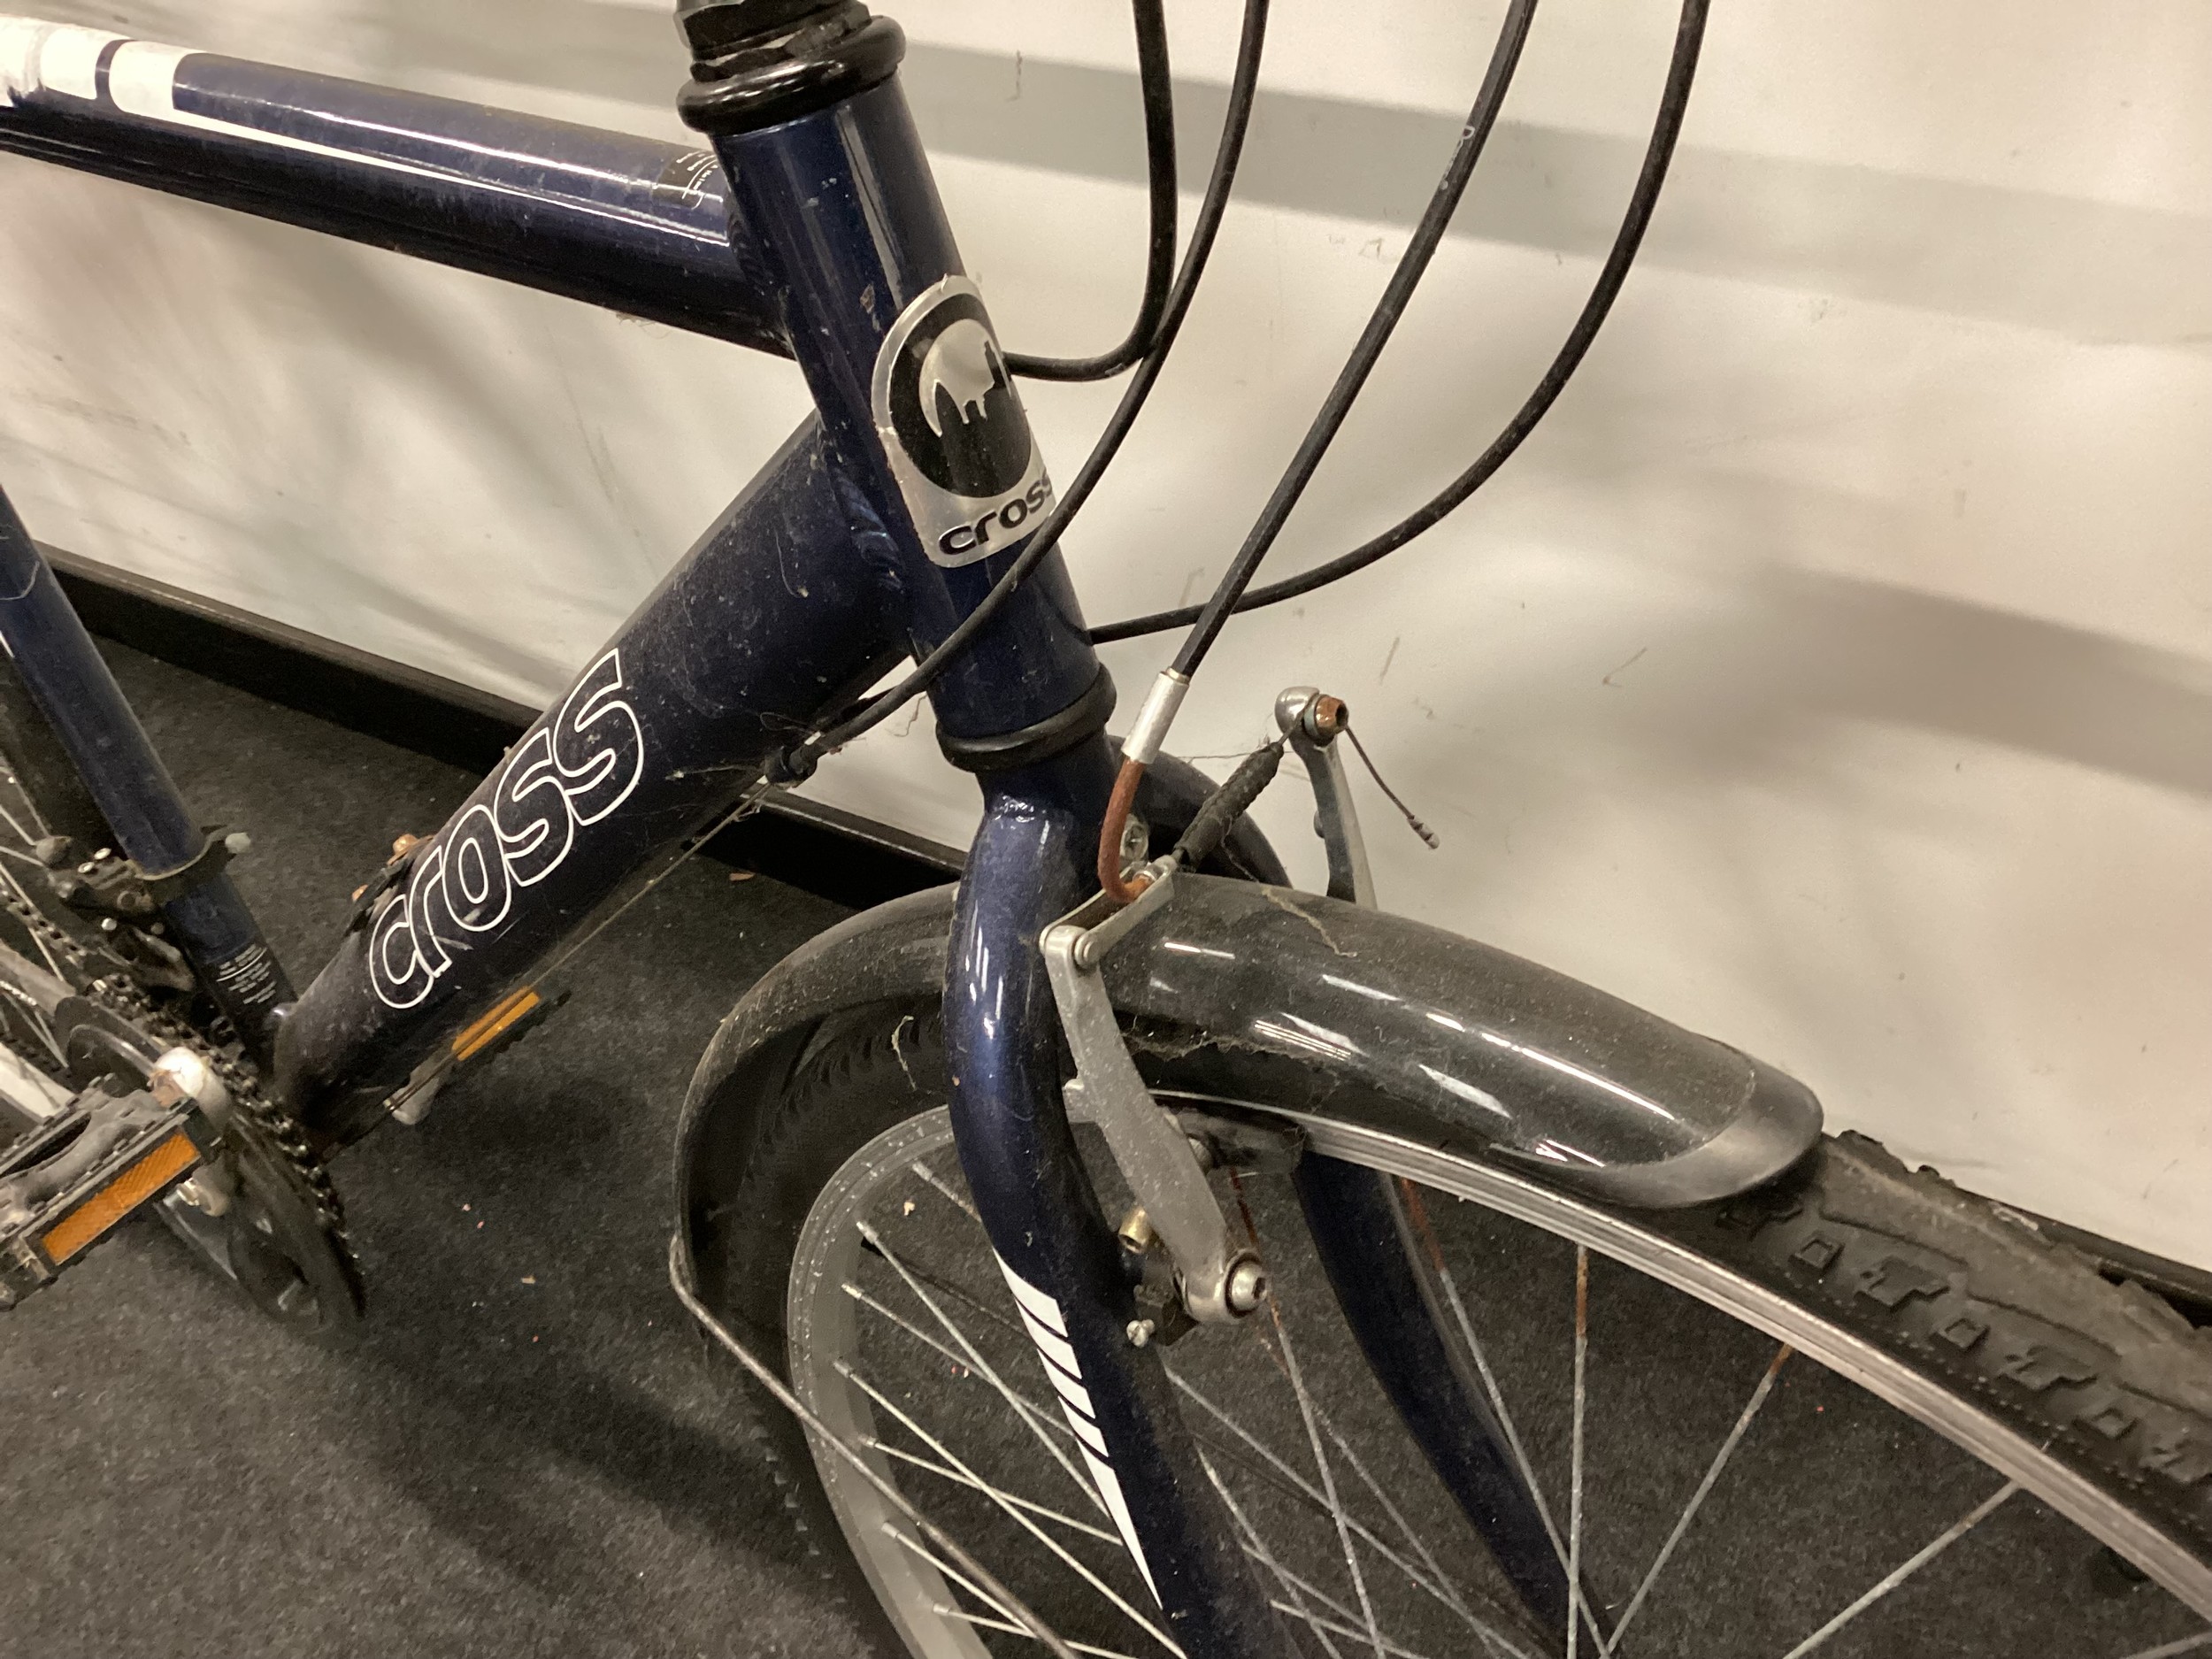 Blue Cross hybrid bicycle 18 gears 21" frame size 28" wheel size (REF 95). - Image 3 of 3